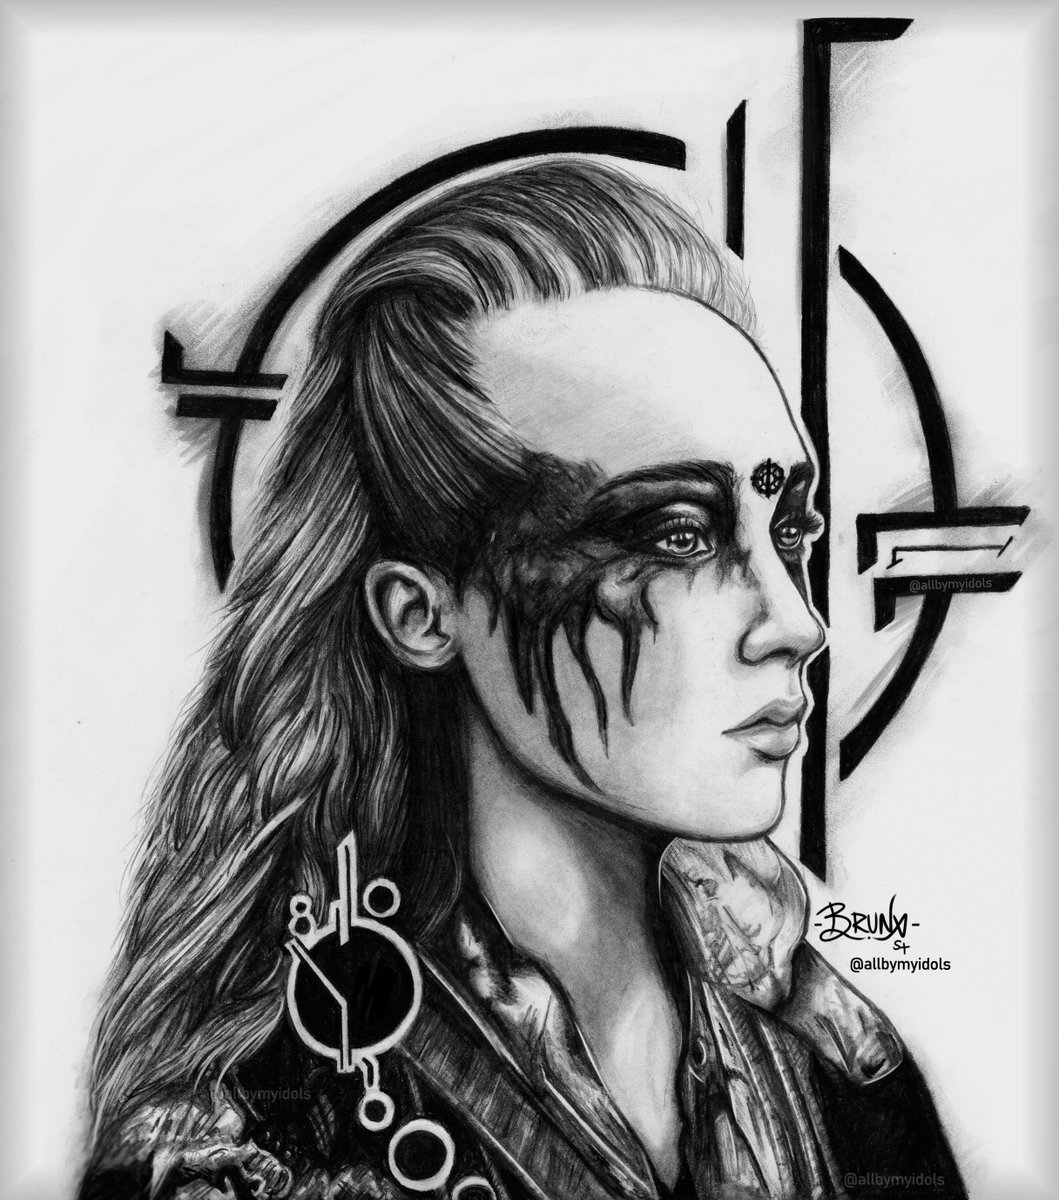 Lexa is gone, but never forgotten ∞ I'm glad I just finished my drawin...